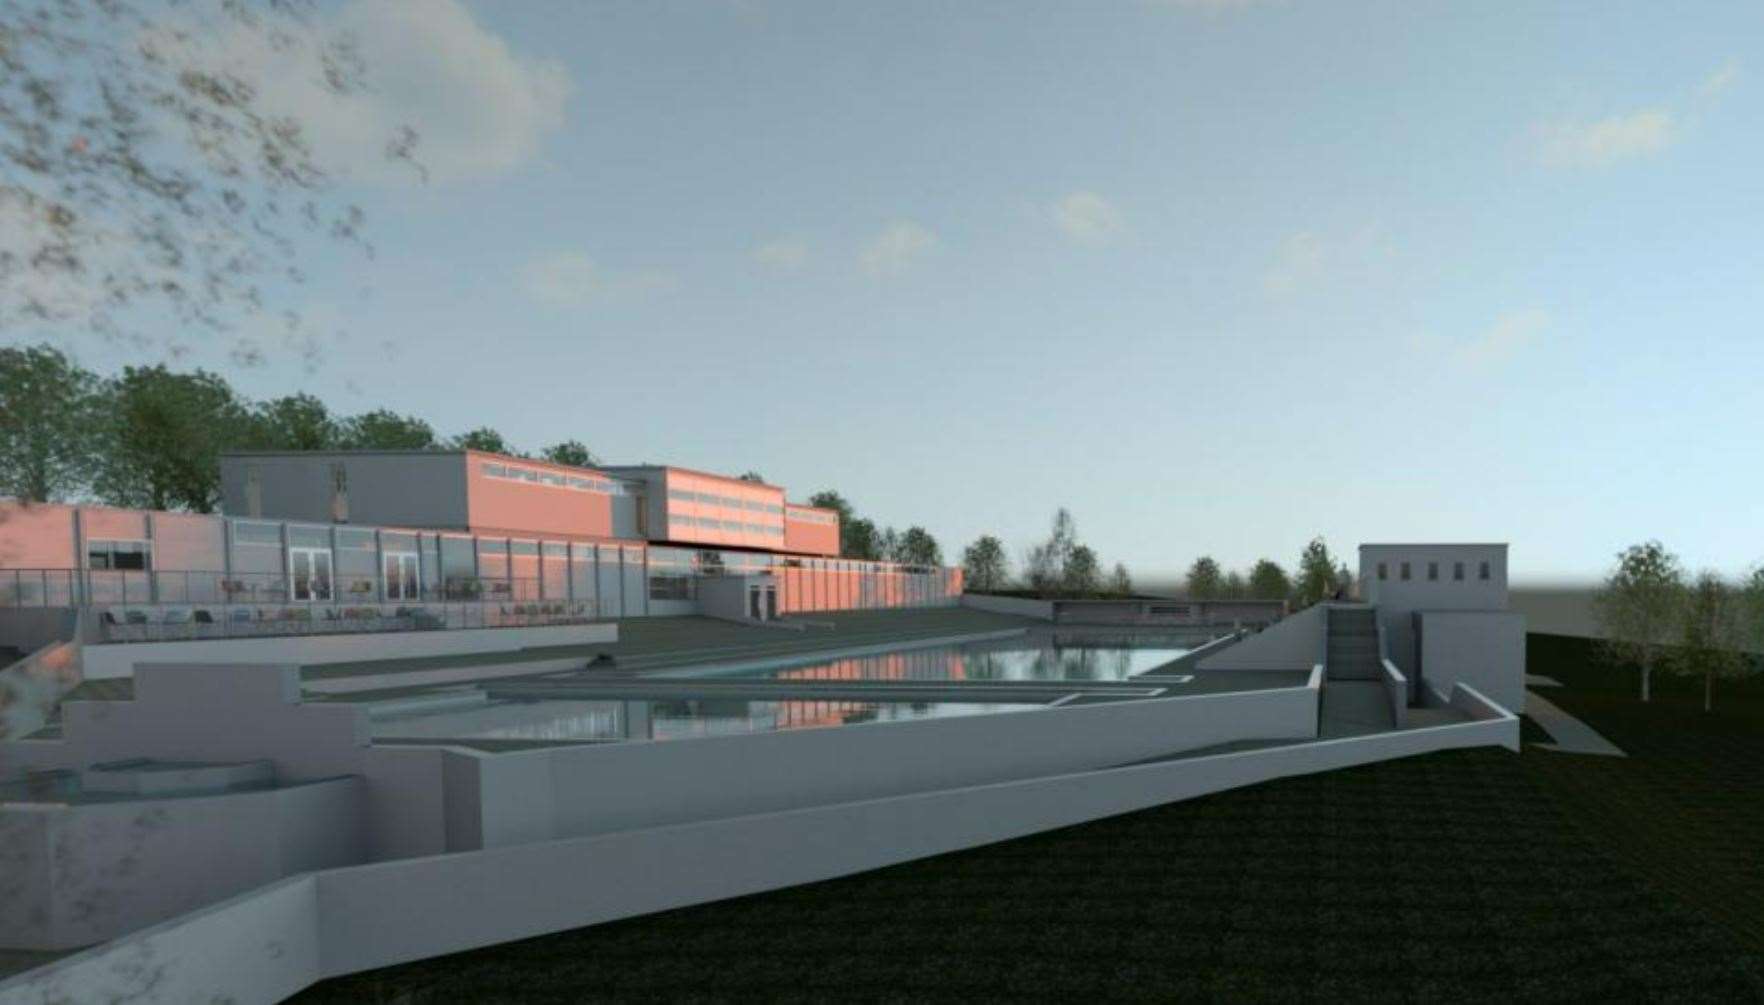 Works on Ipswich's Broomhill Lido set to go ahead after funding was secured. Picture: KLH Architects